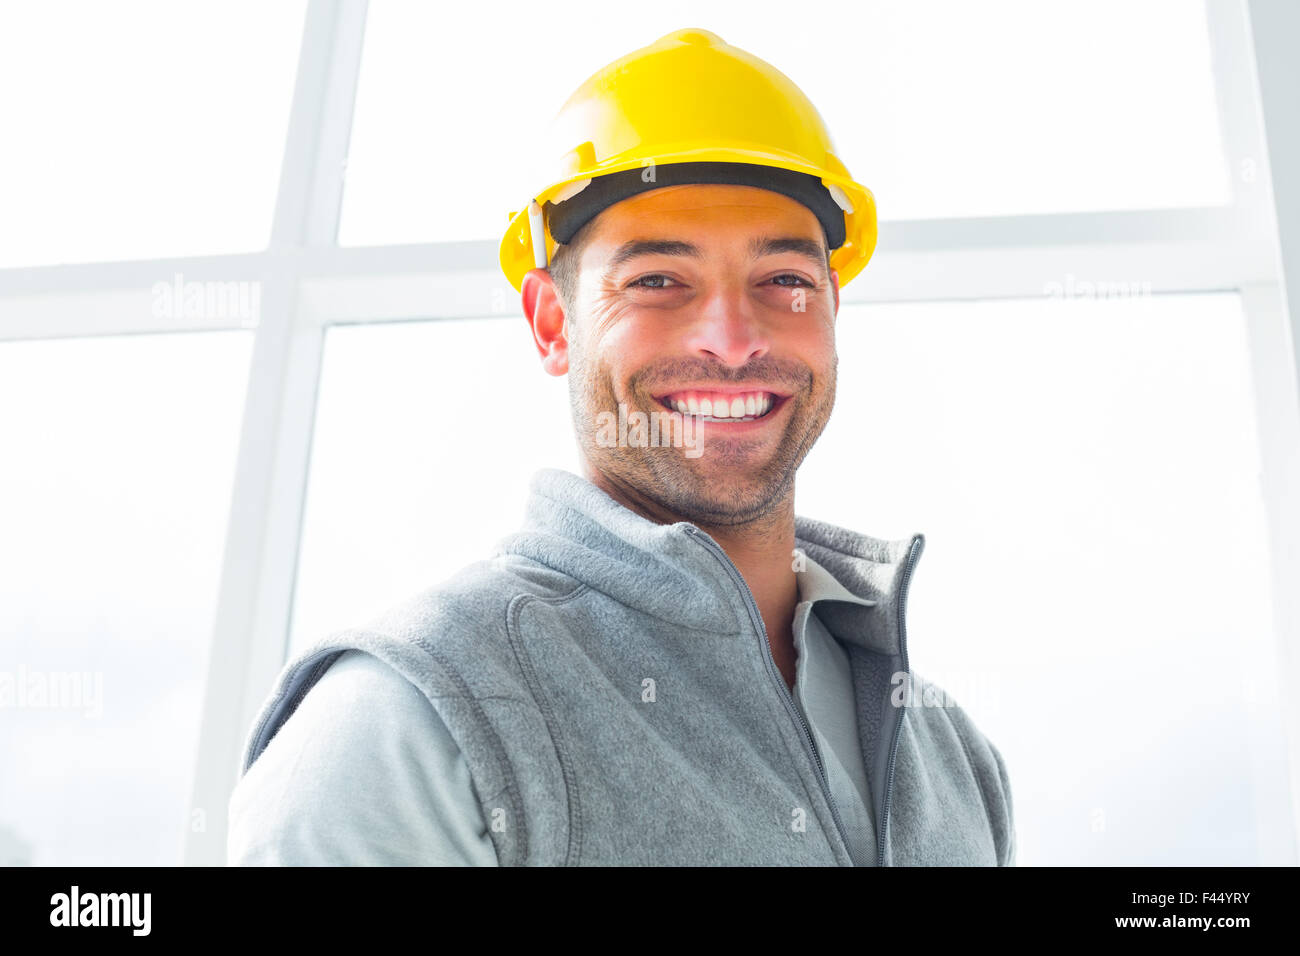 Manual worker wearing hardhat in building Stock Photo